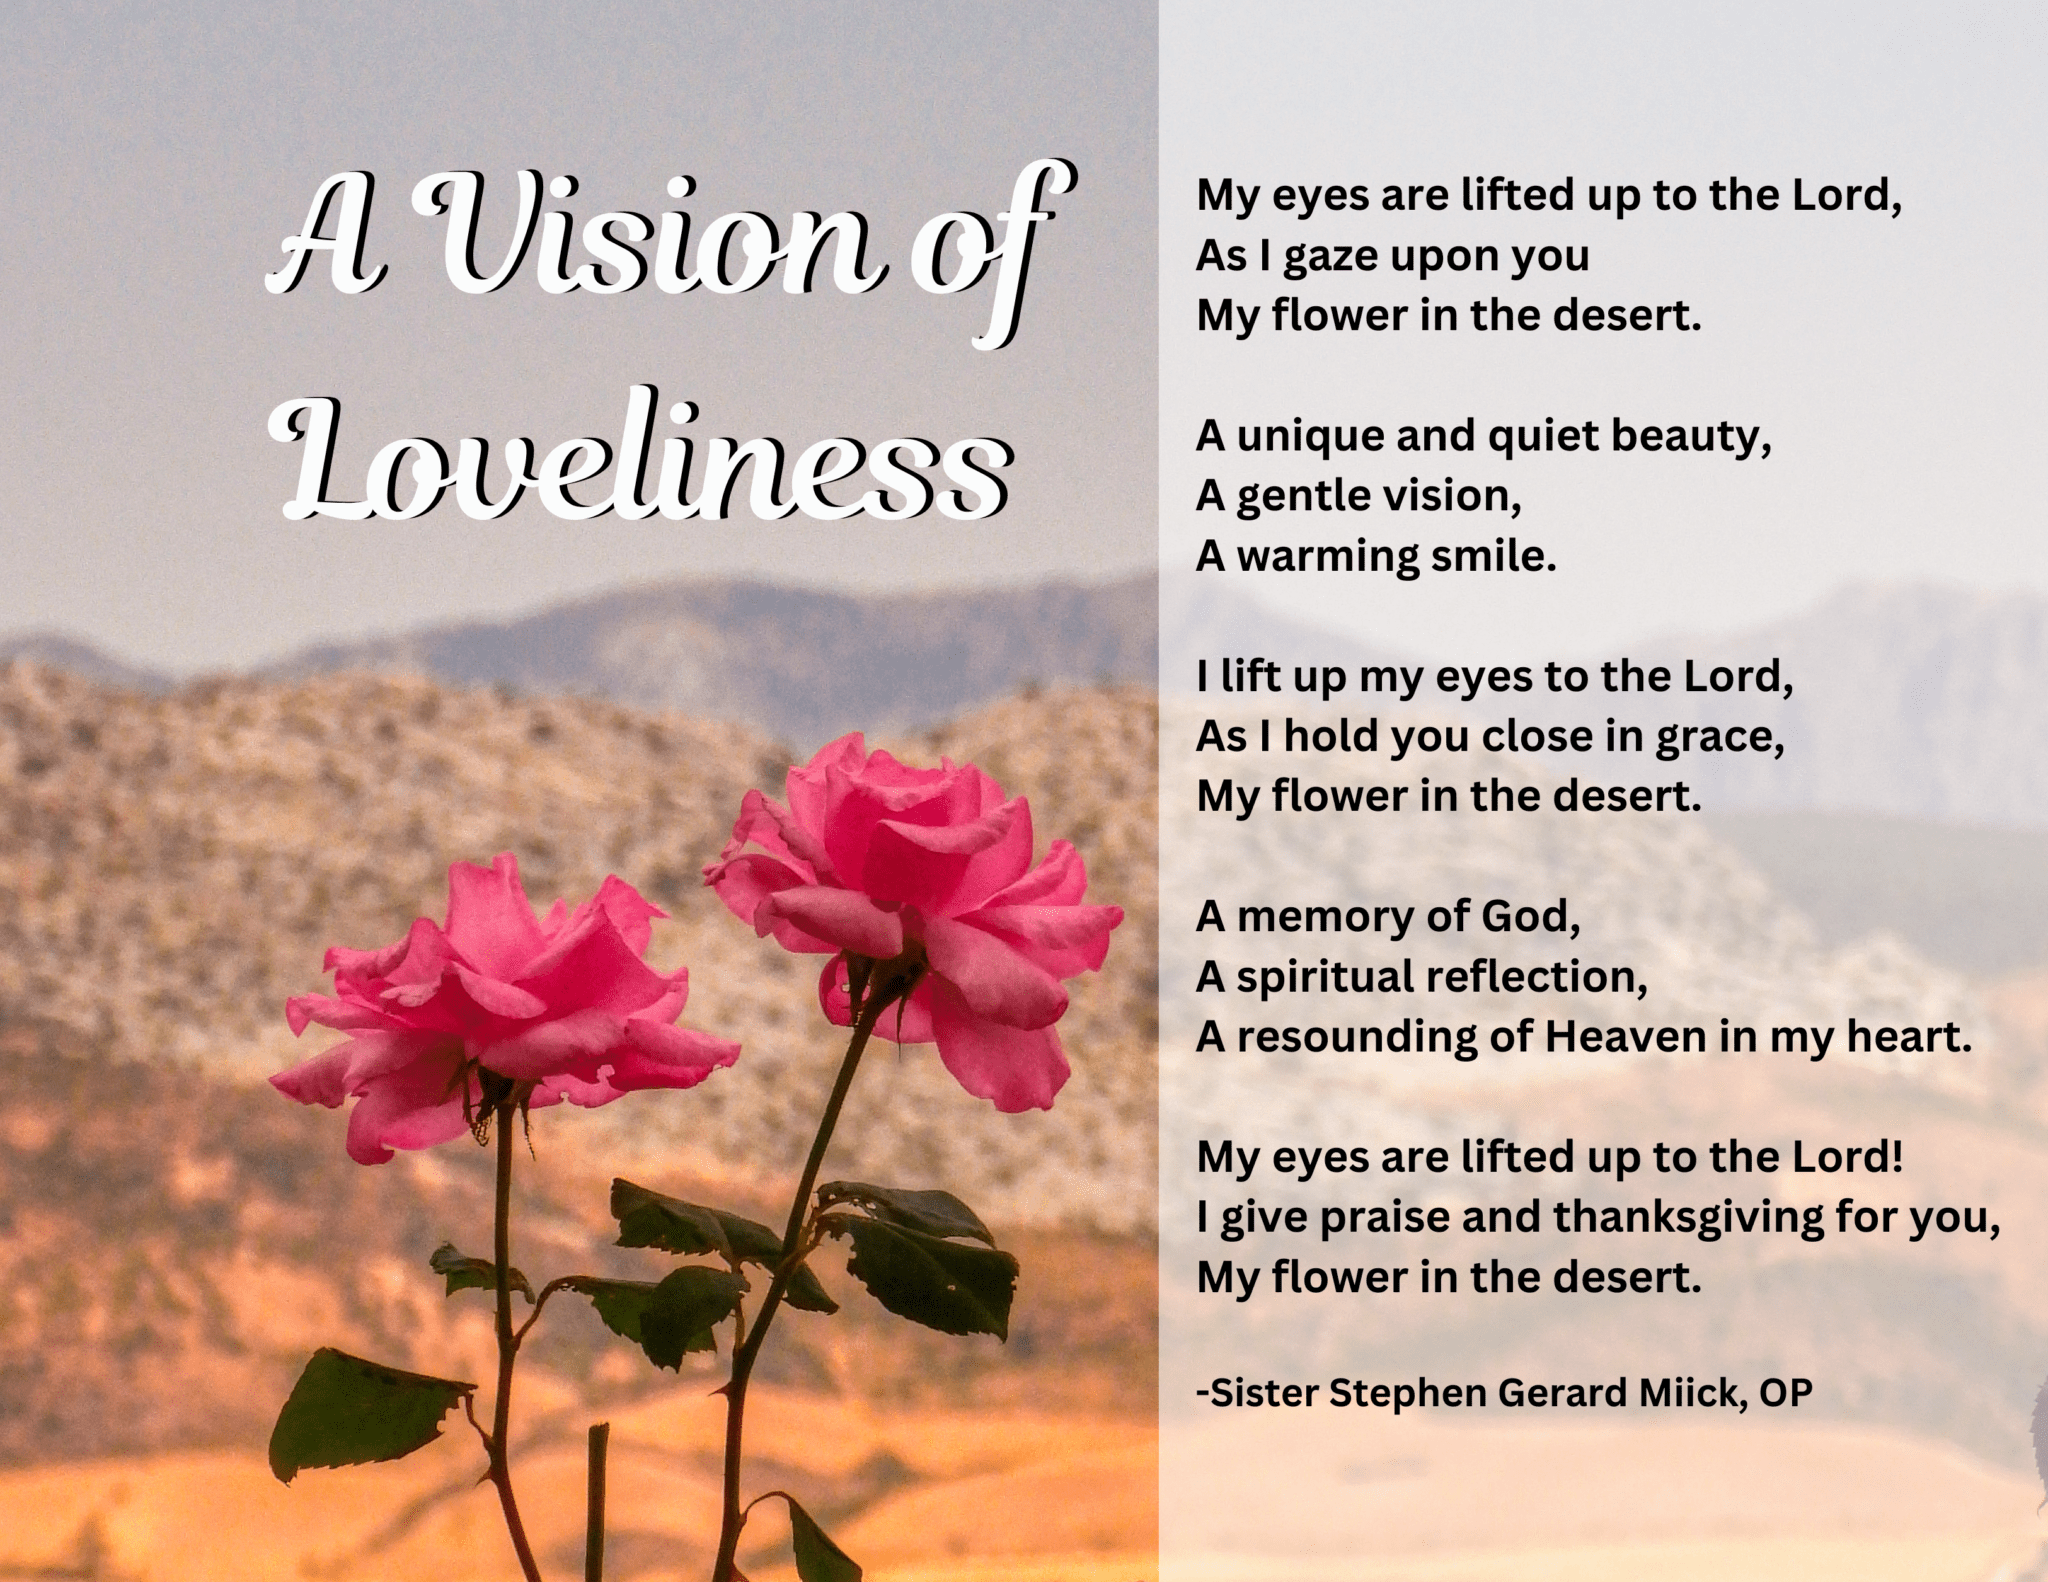 a vision of loveliness poem